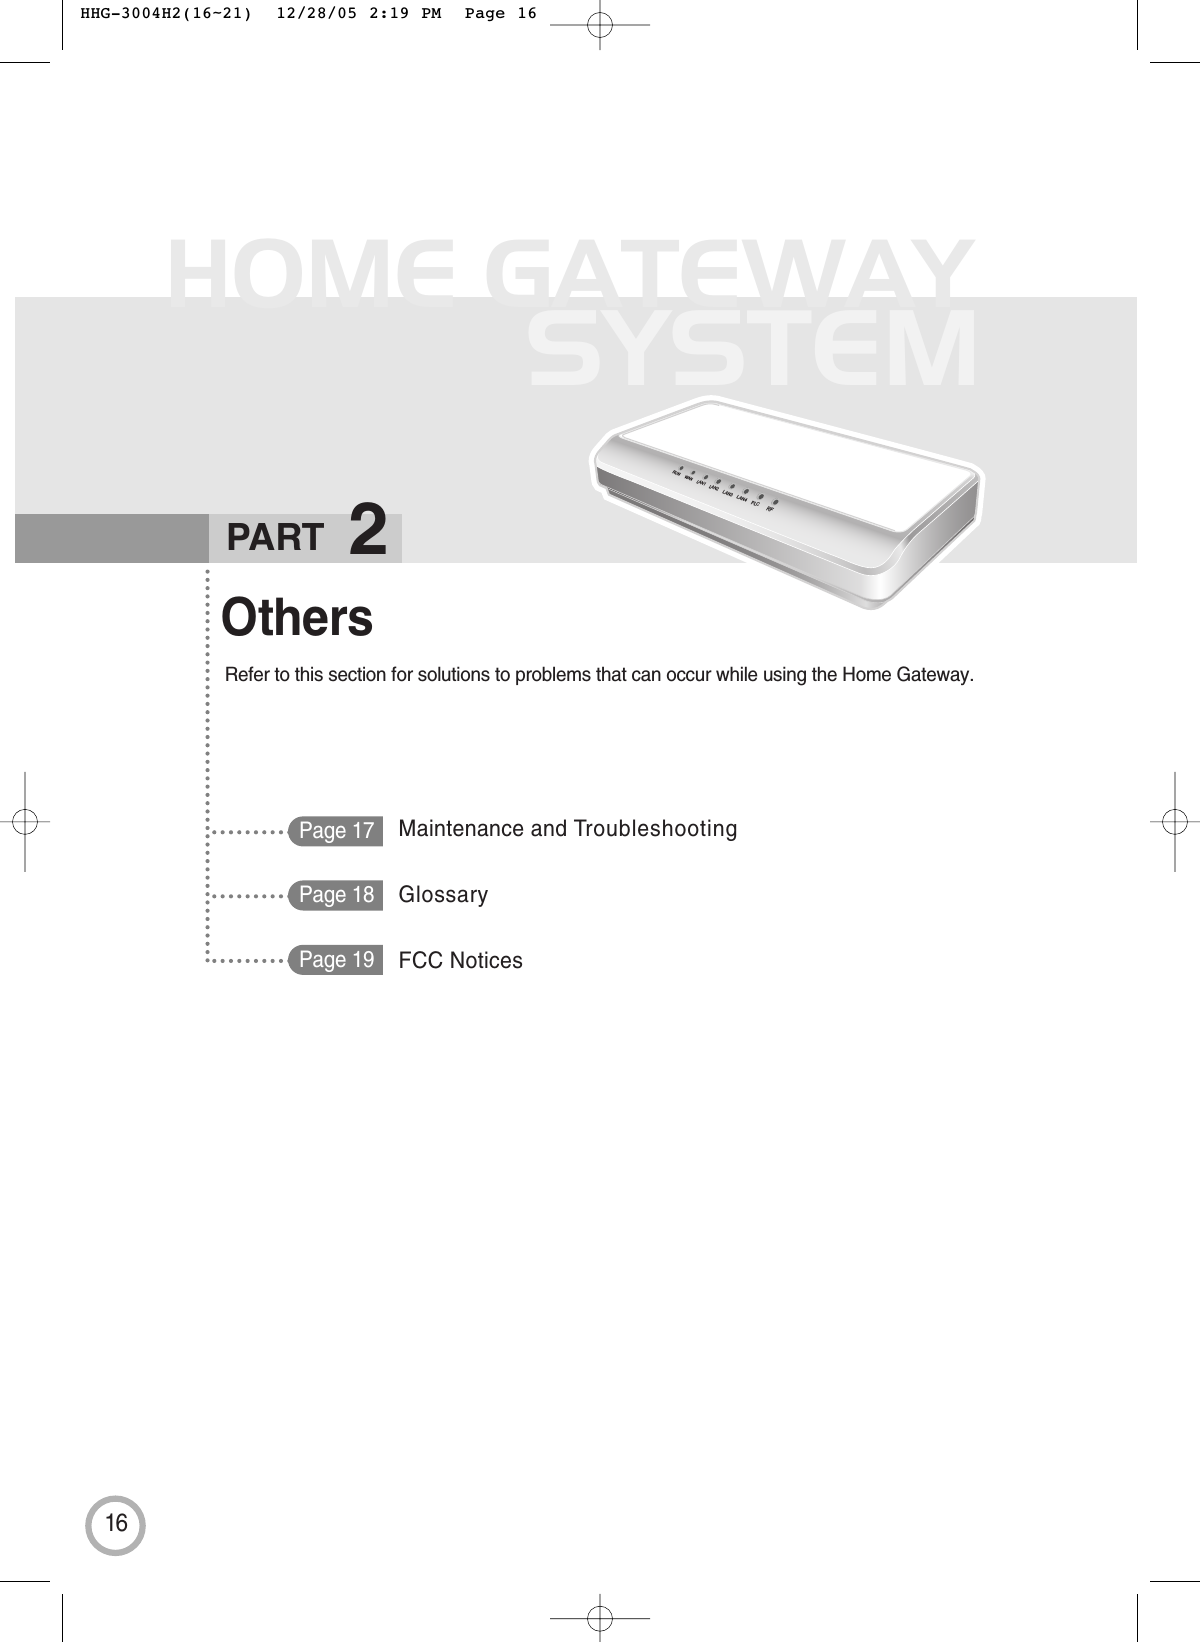 16HOME GATEWAYSYSTEMPage 17OthersRefer to this section for solutions to problems that can occur while using the Home Gateway.PART 2RUN WANLAN1LAN2LAN3LAN4PLCRFPage 18Page 19Maintenance and TroubleshootingGlossaryFCC Notices HHG-3004H2(16~21)  12/28/05 2:19 PM  Page 16